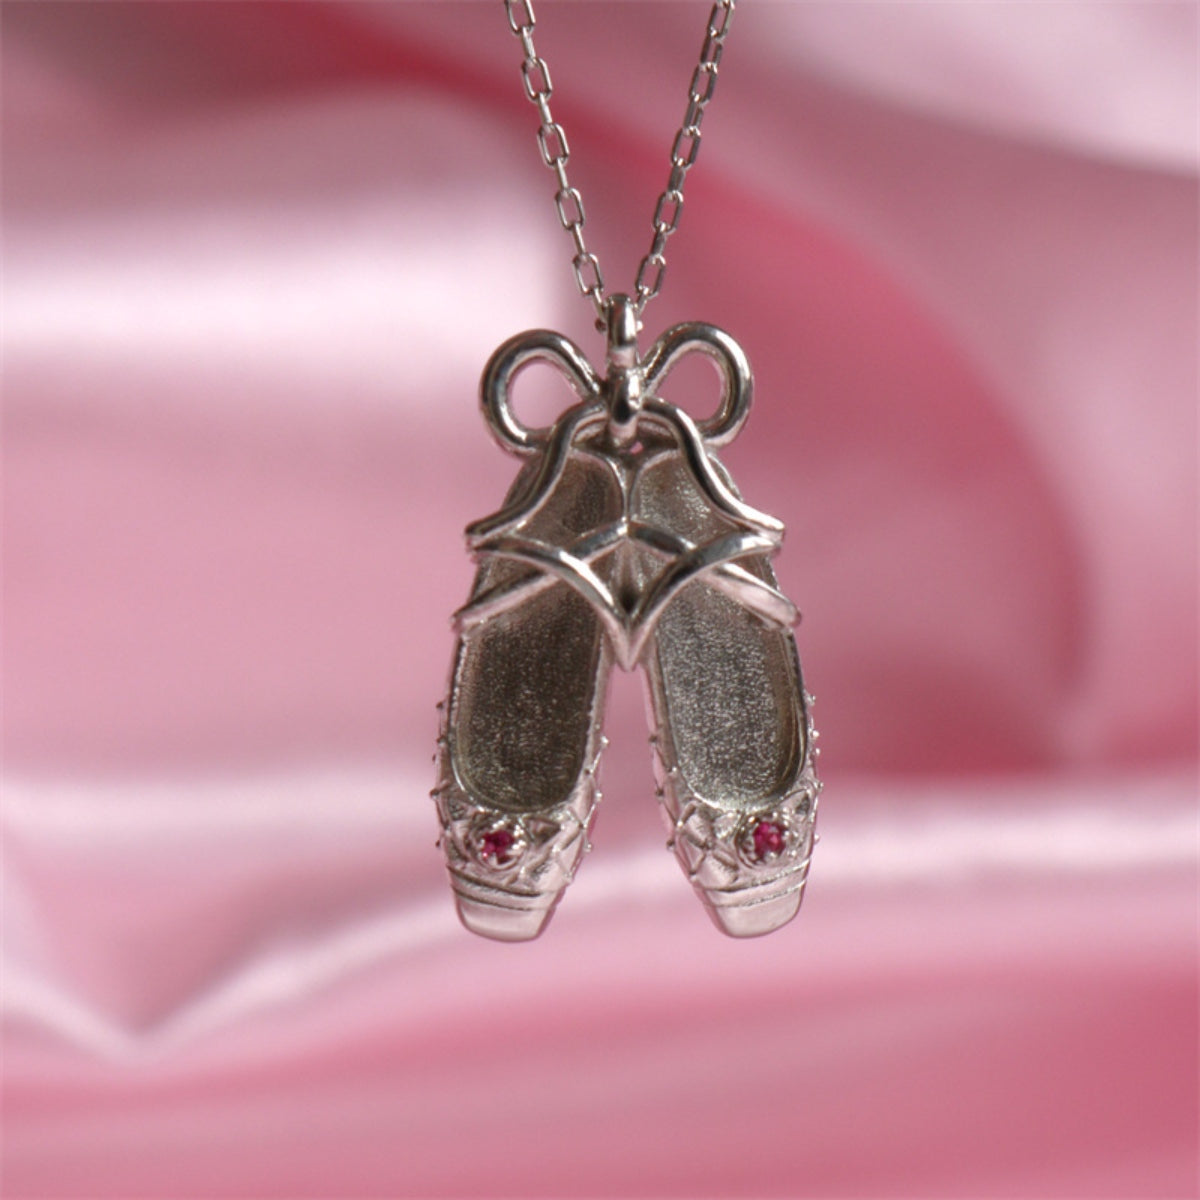 Ballet shoe pendant necklace is a beautiful addition to any collection